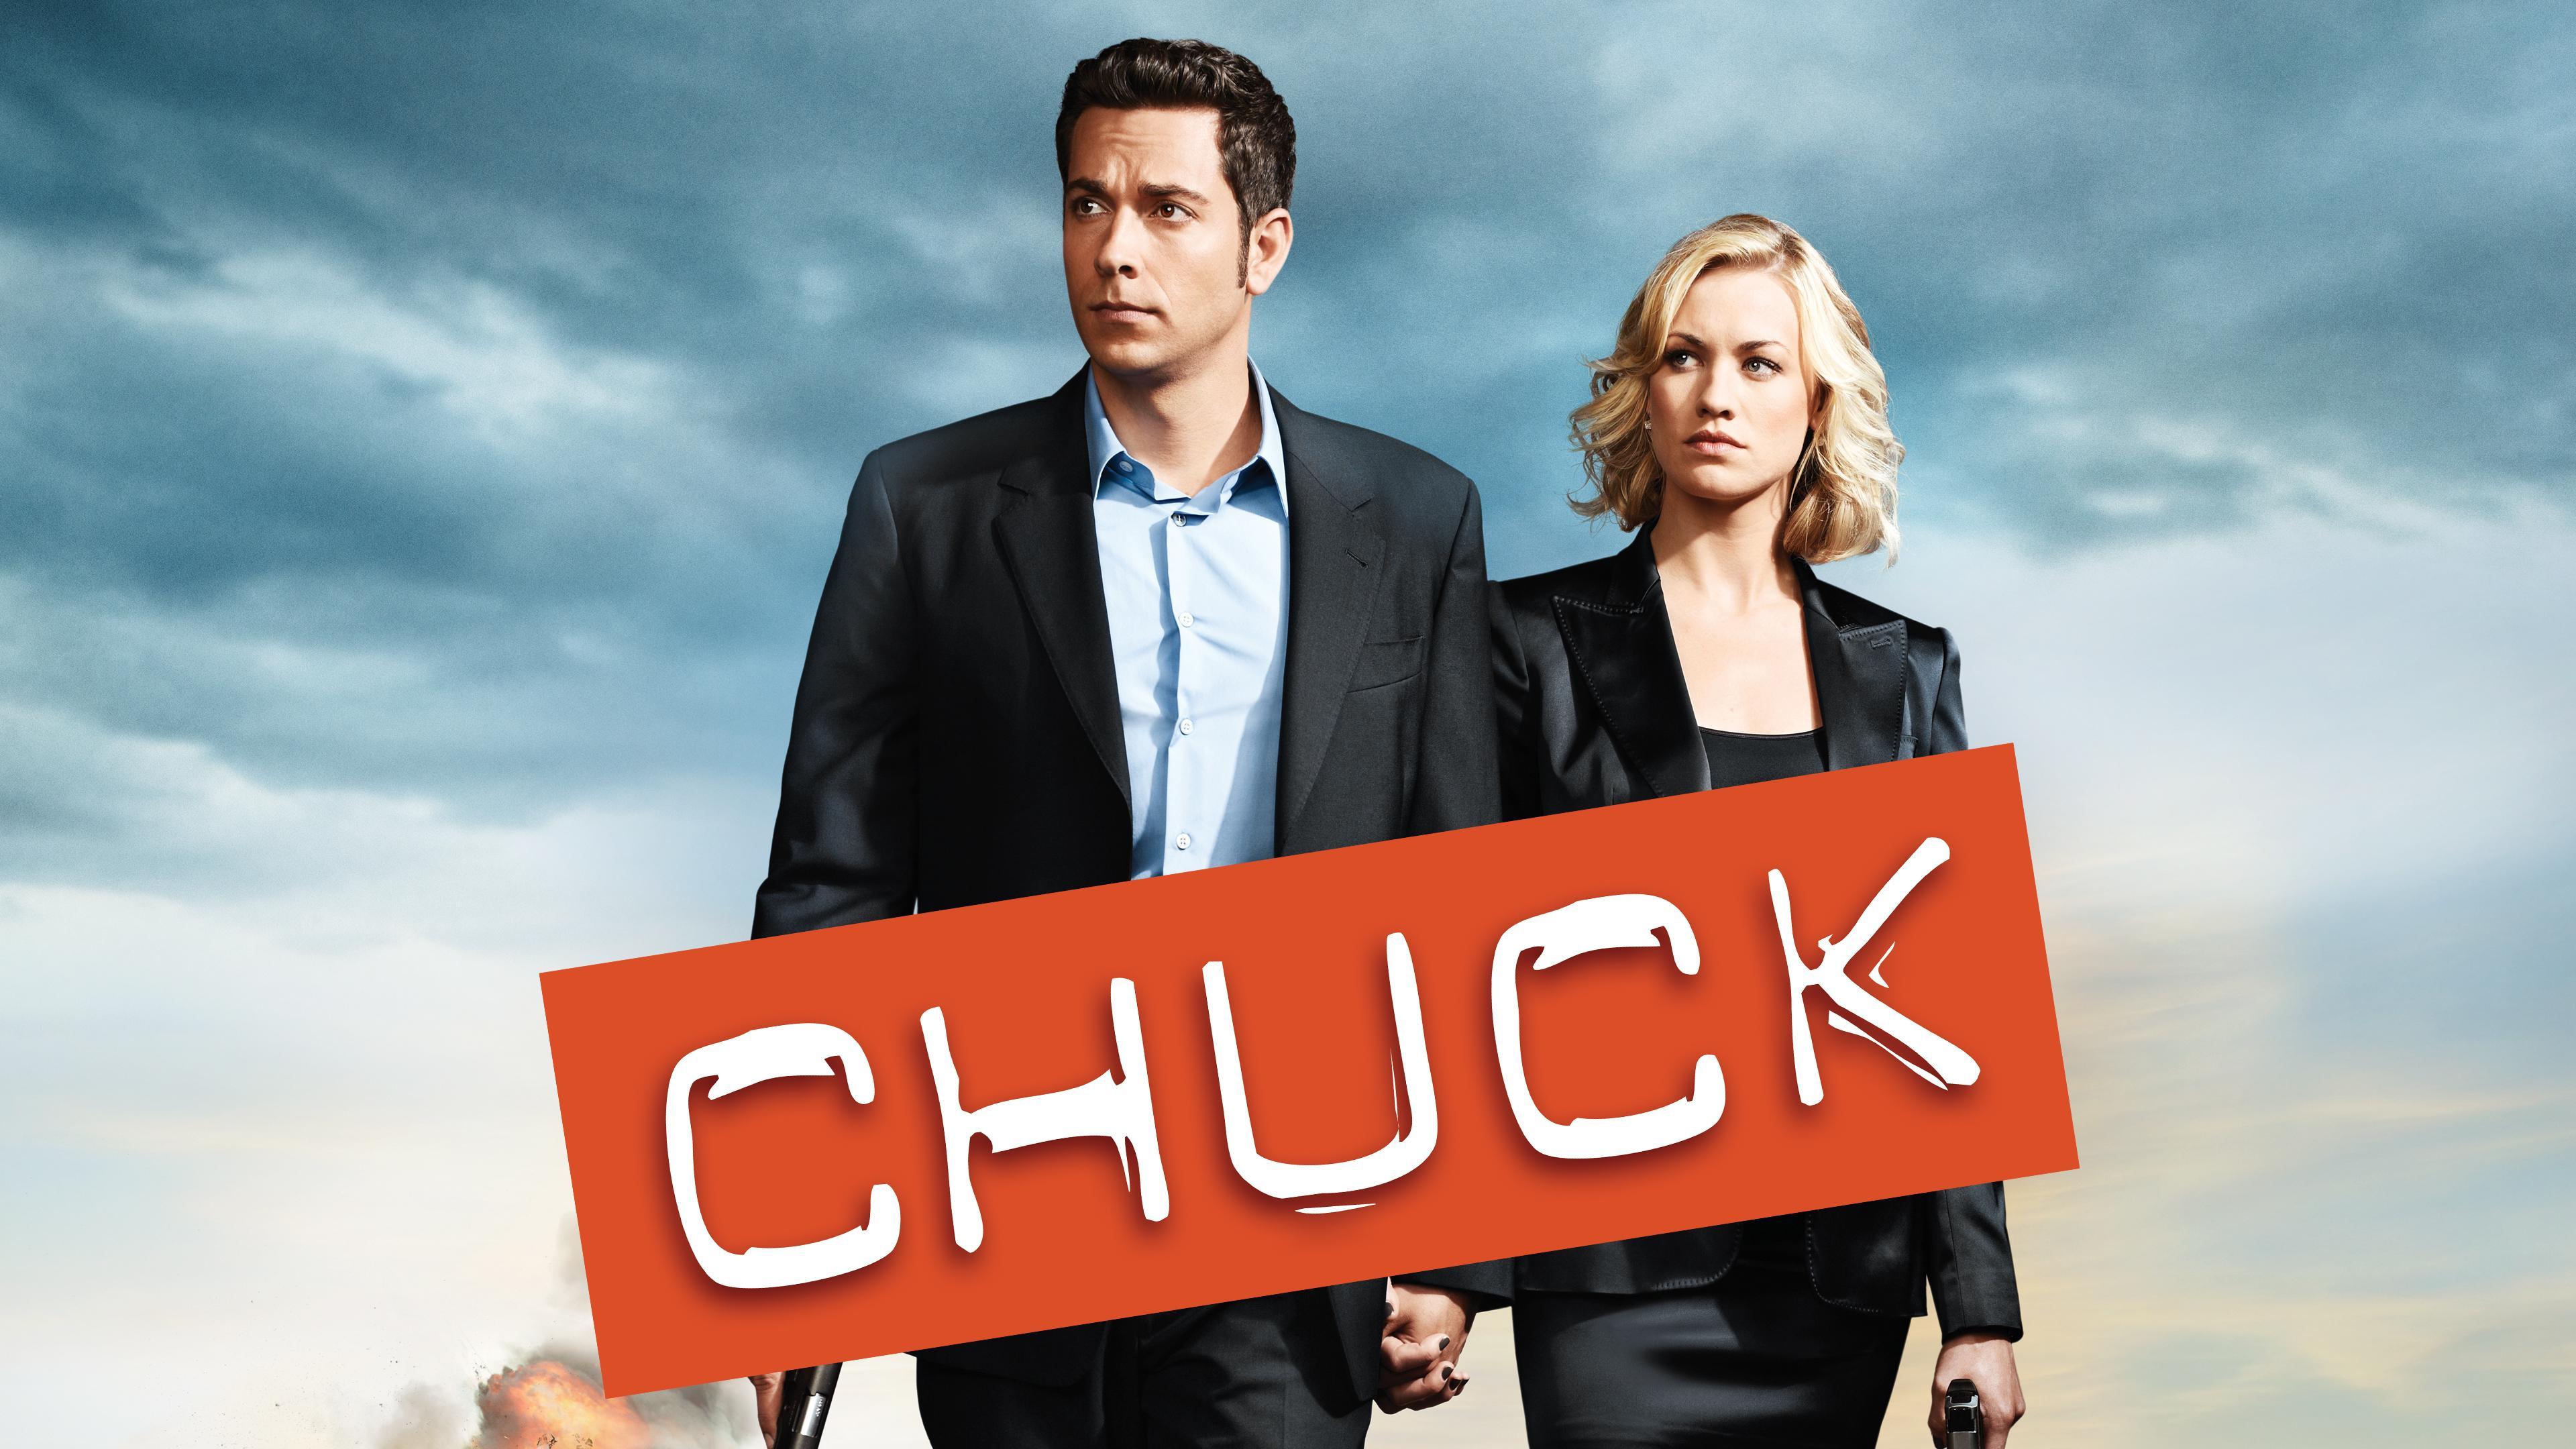 All five seasons of Chuck series will be streaming soon on HBO